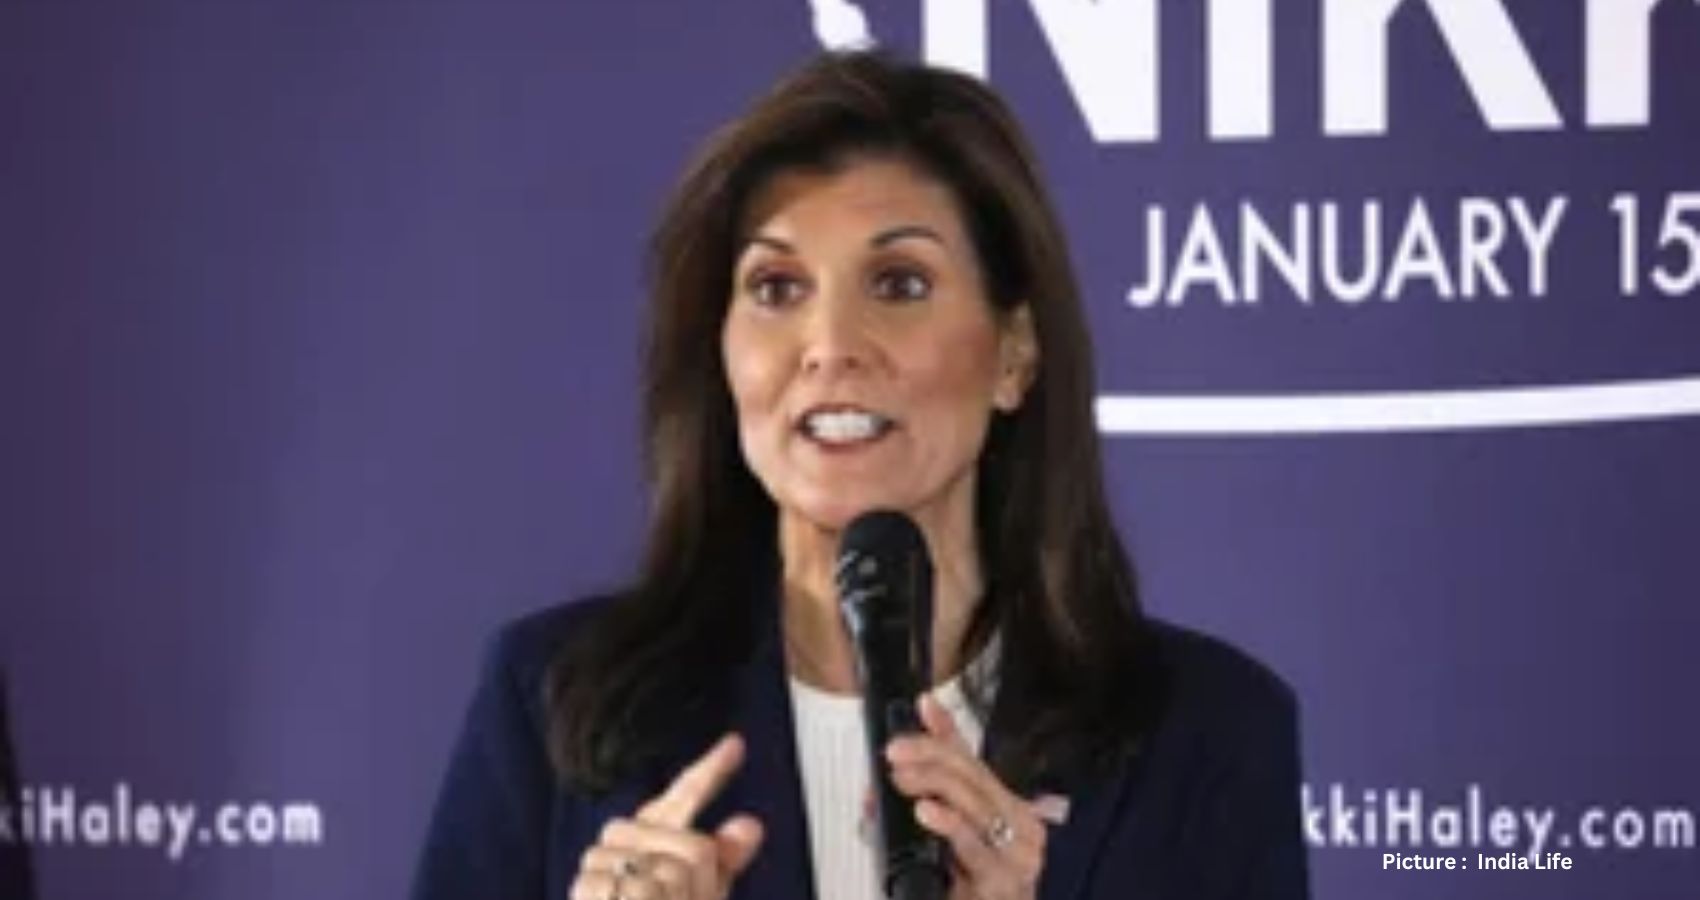 Nikki Haley Assumes Leadership Role at Hudson Institute Amid Presidential Speculation